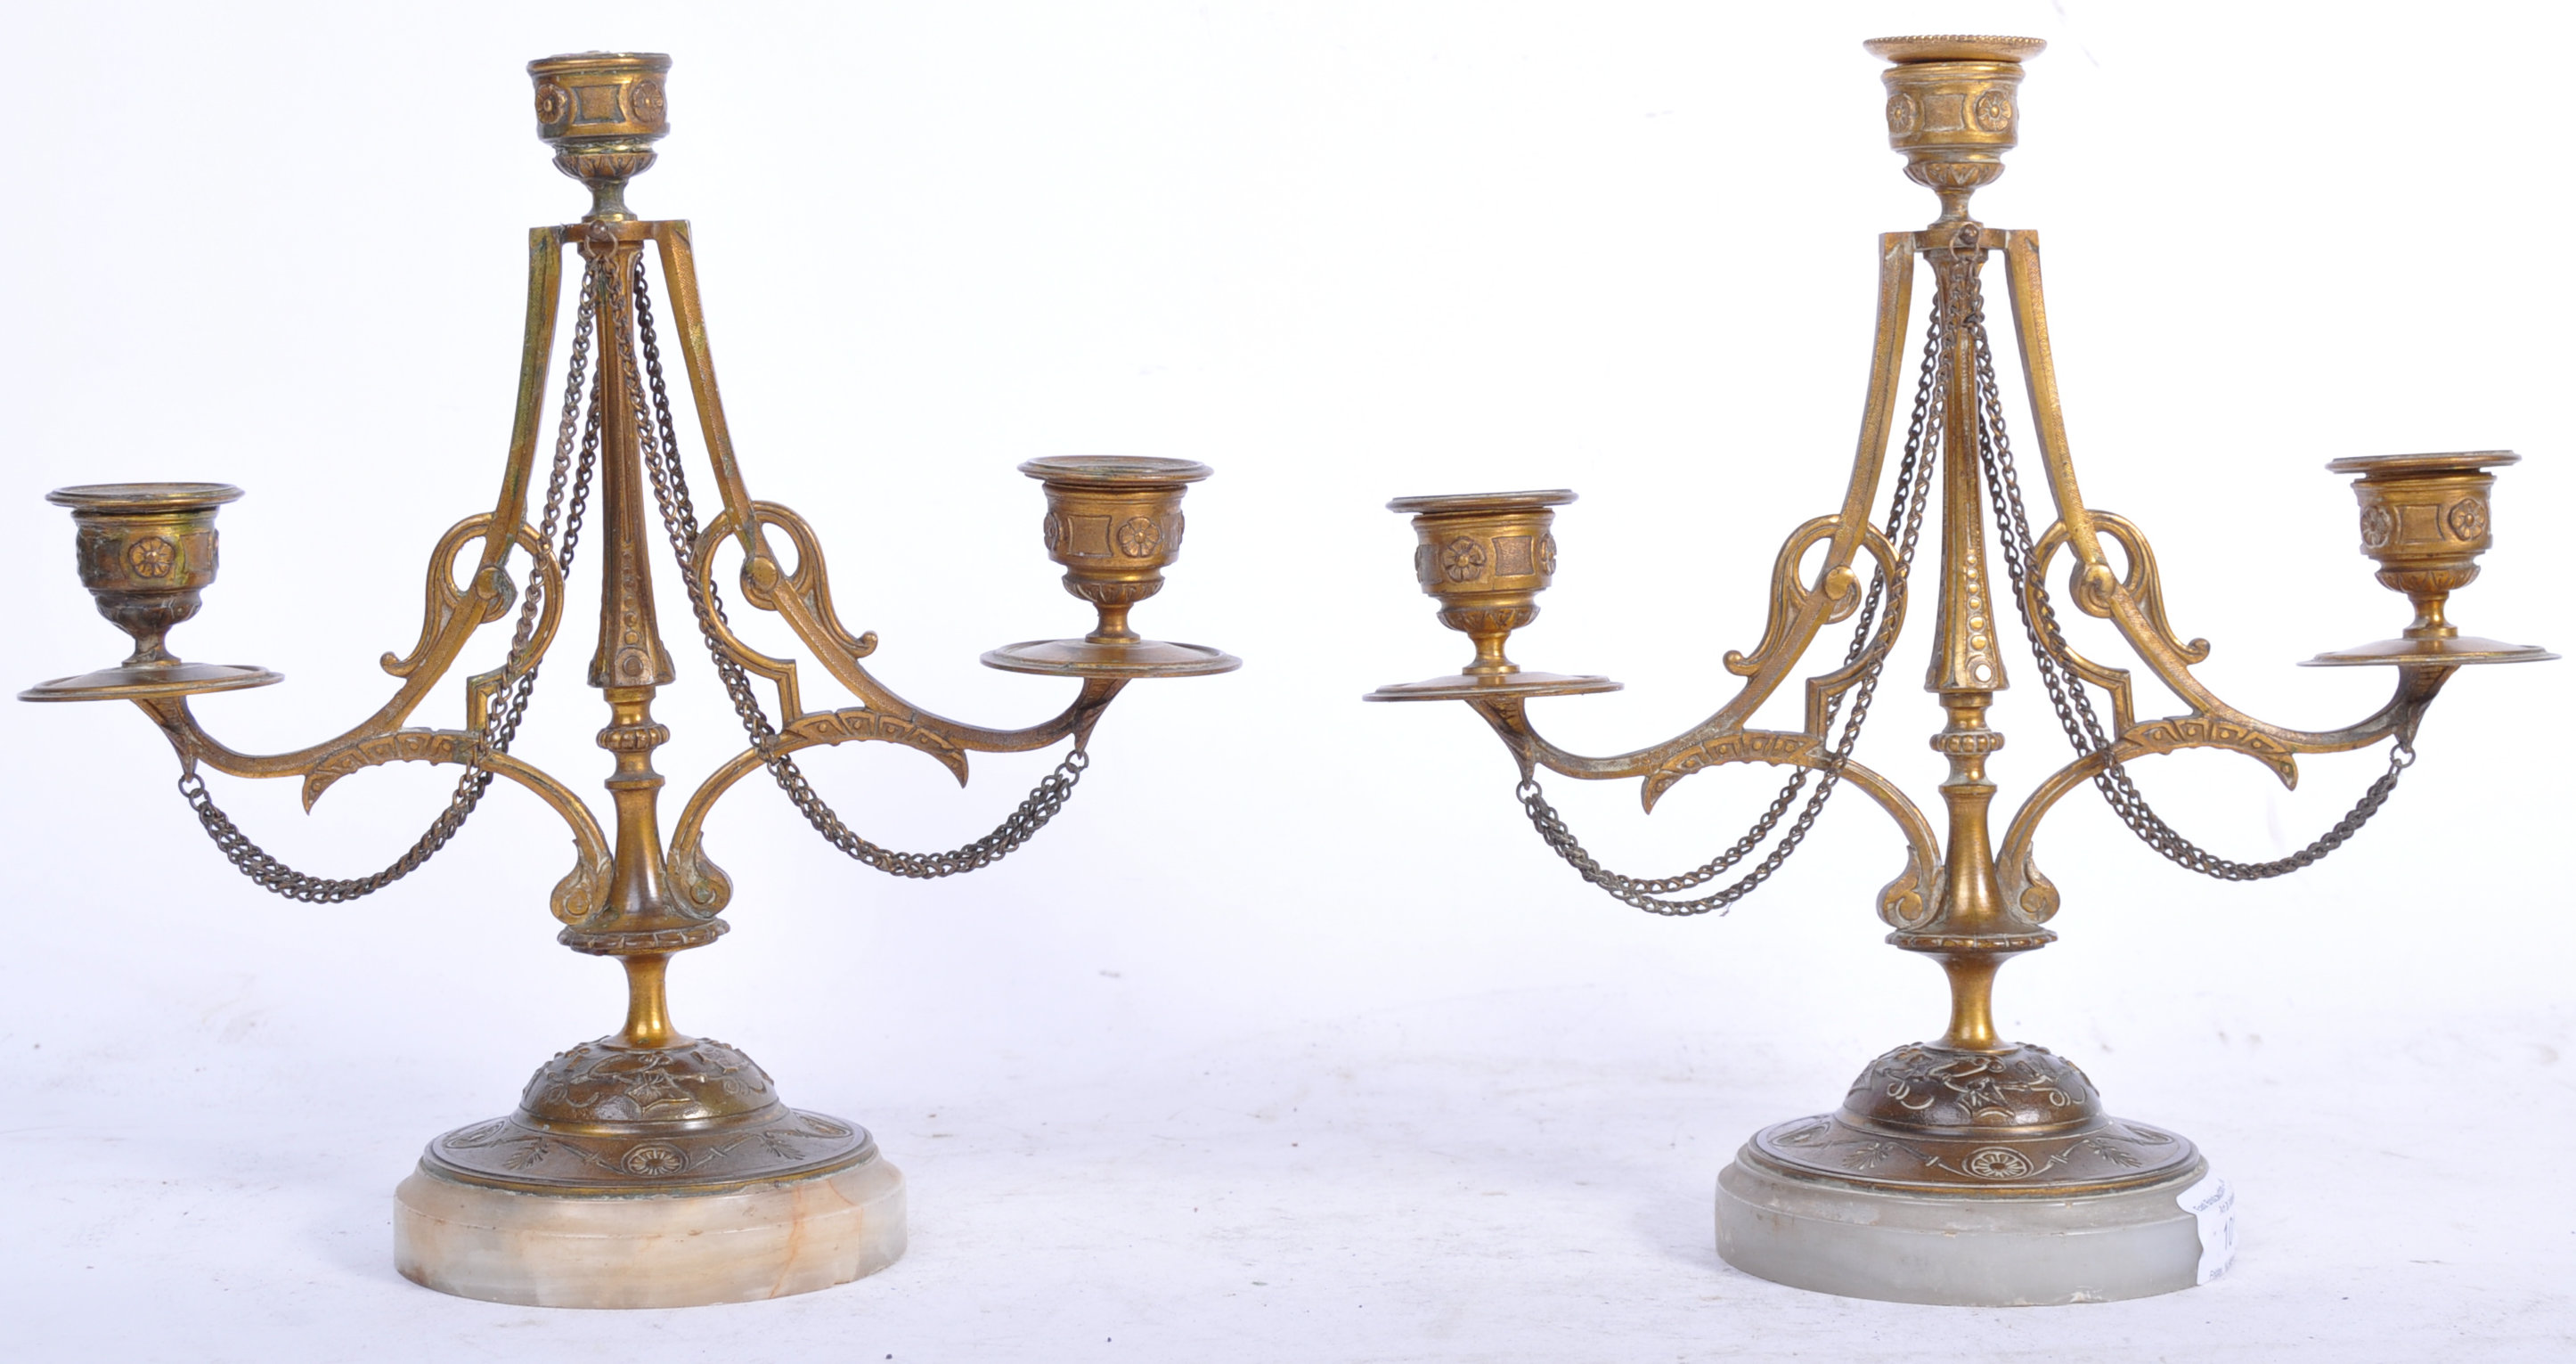 PAIR OF 19TH CENTURY BRONZE AND MARBLE CANDLESTICKS - Image 2 of 8